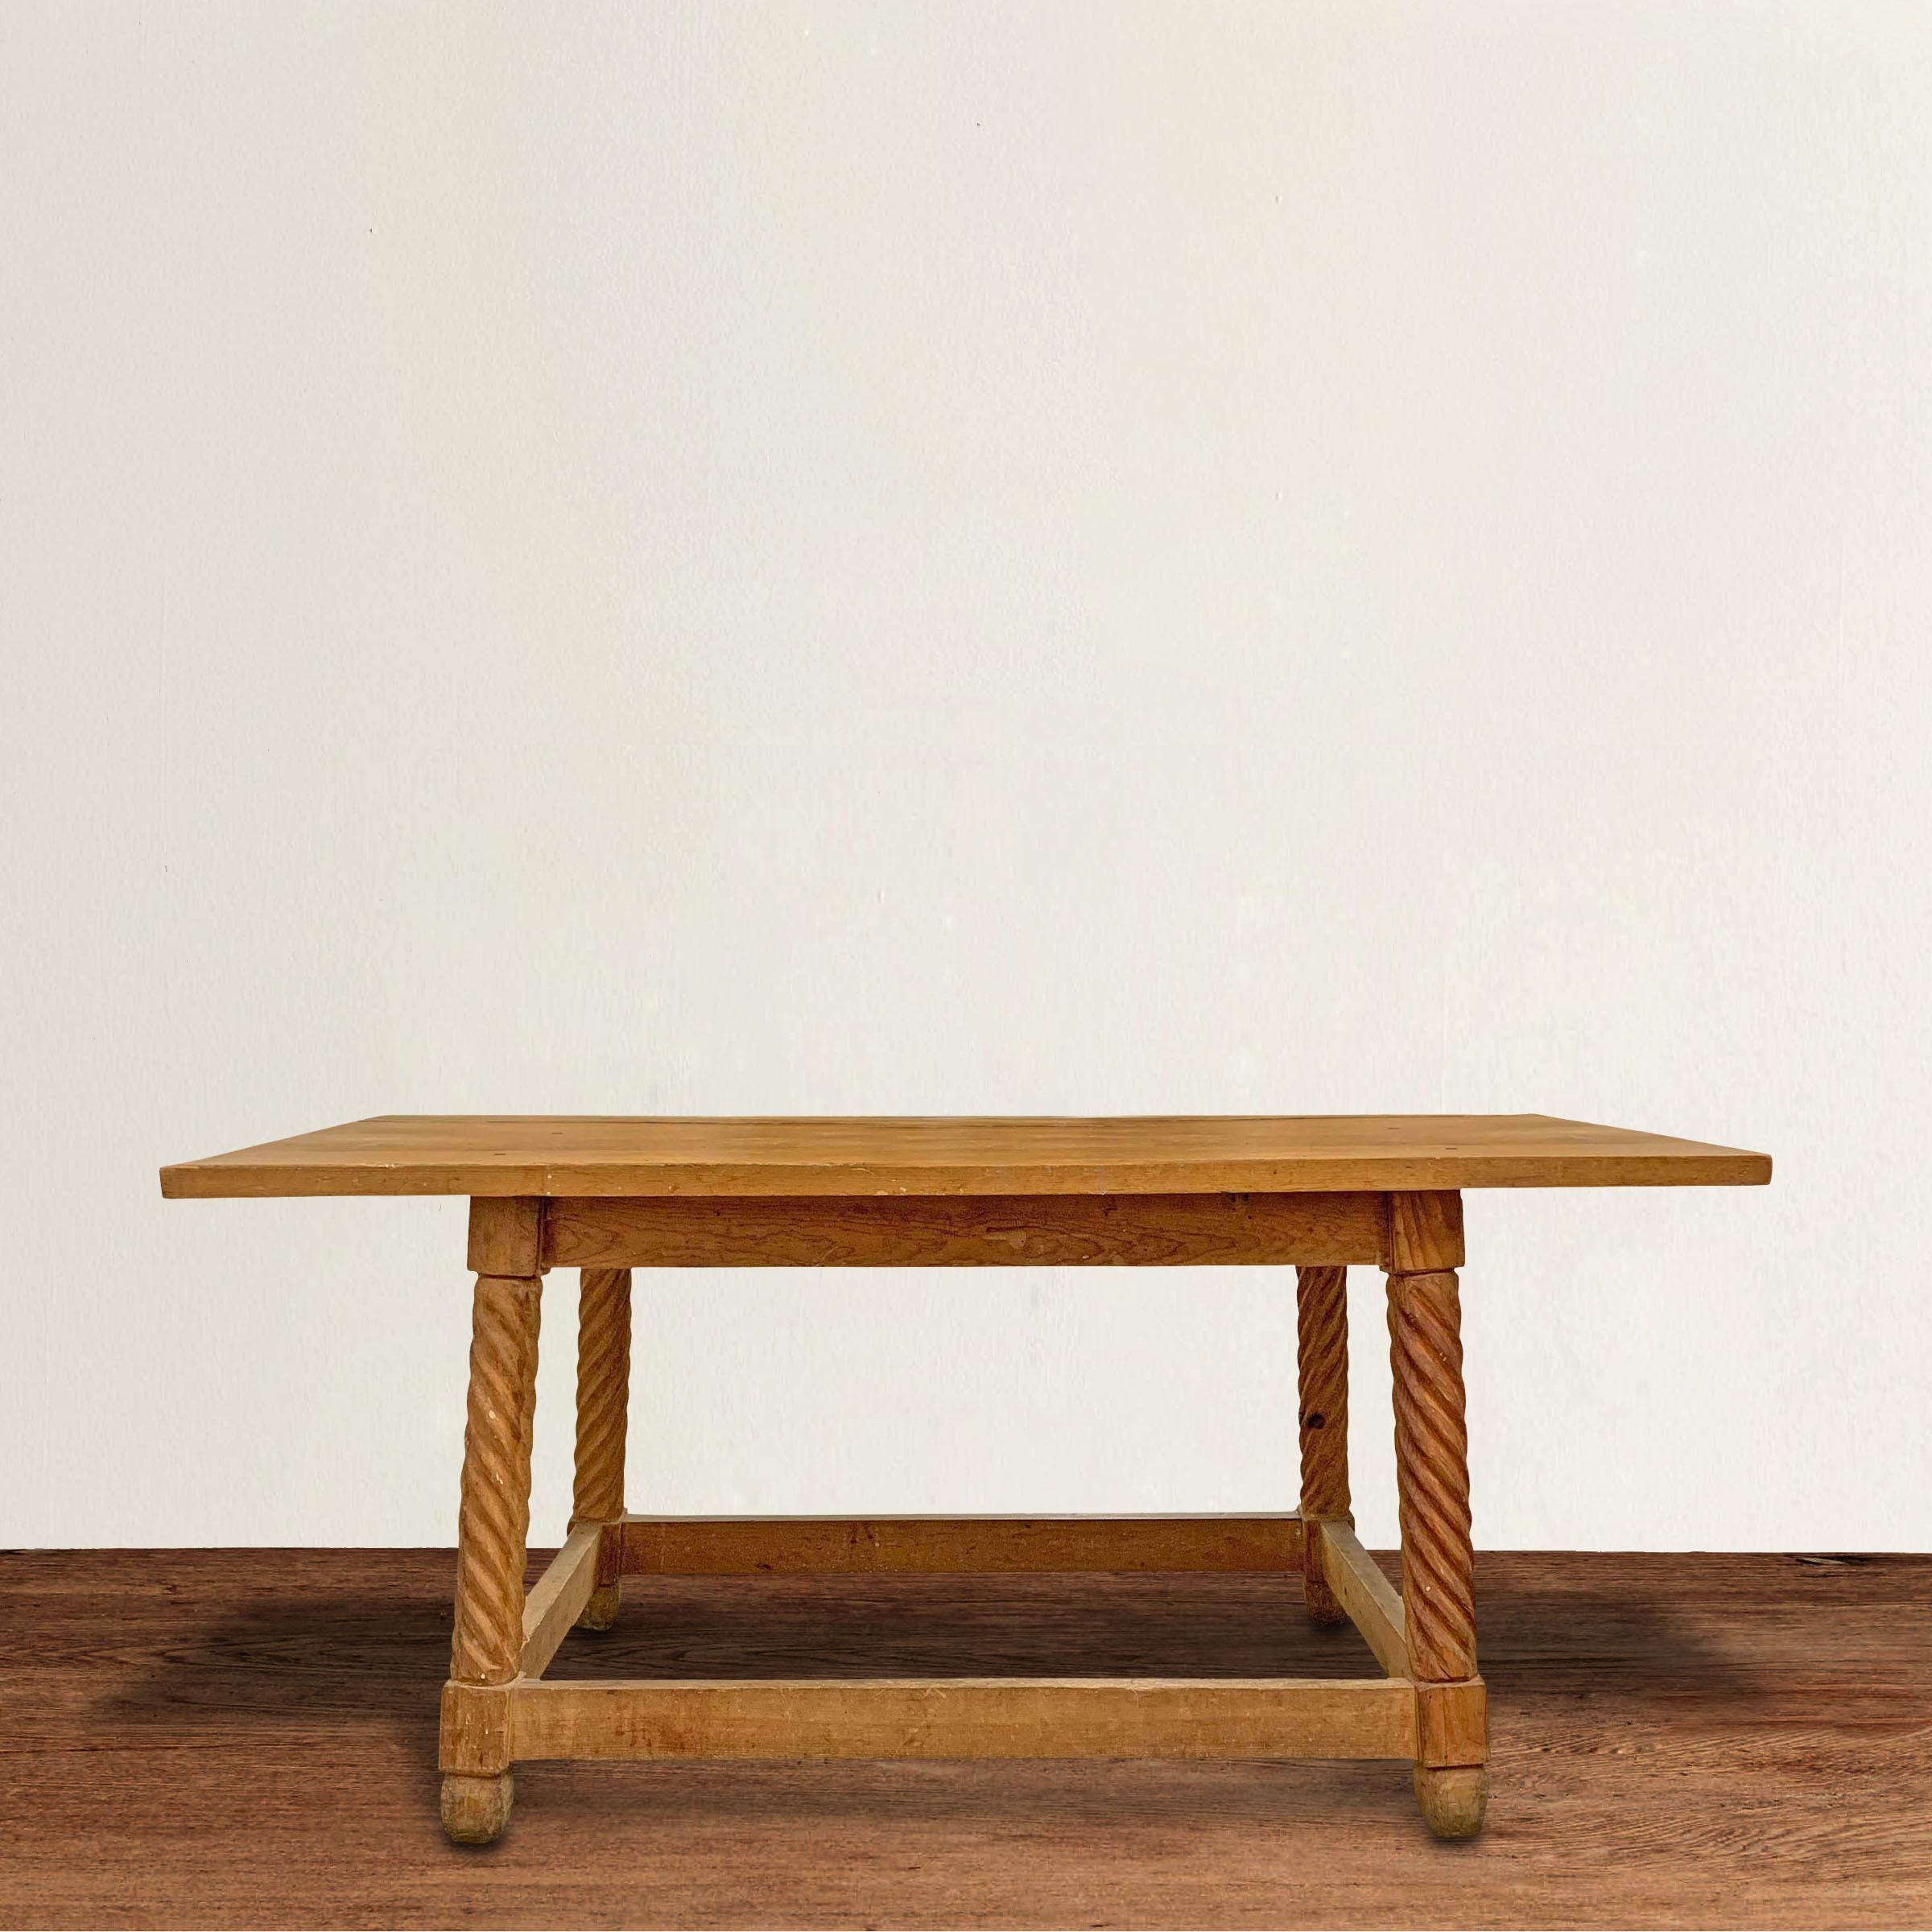 A wonderful early 20th century Mexican hand carved pine table of rectangular form with stylized tapered barley-twist legs, simple stretchers, and a top held in place by multiple square wrought iron pegs. Table would work well as a kitchen island,